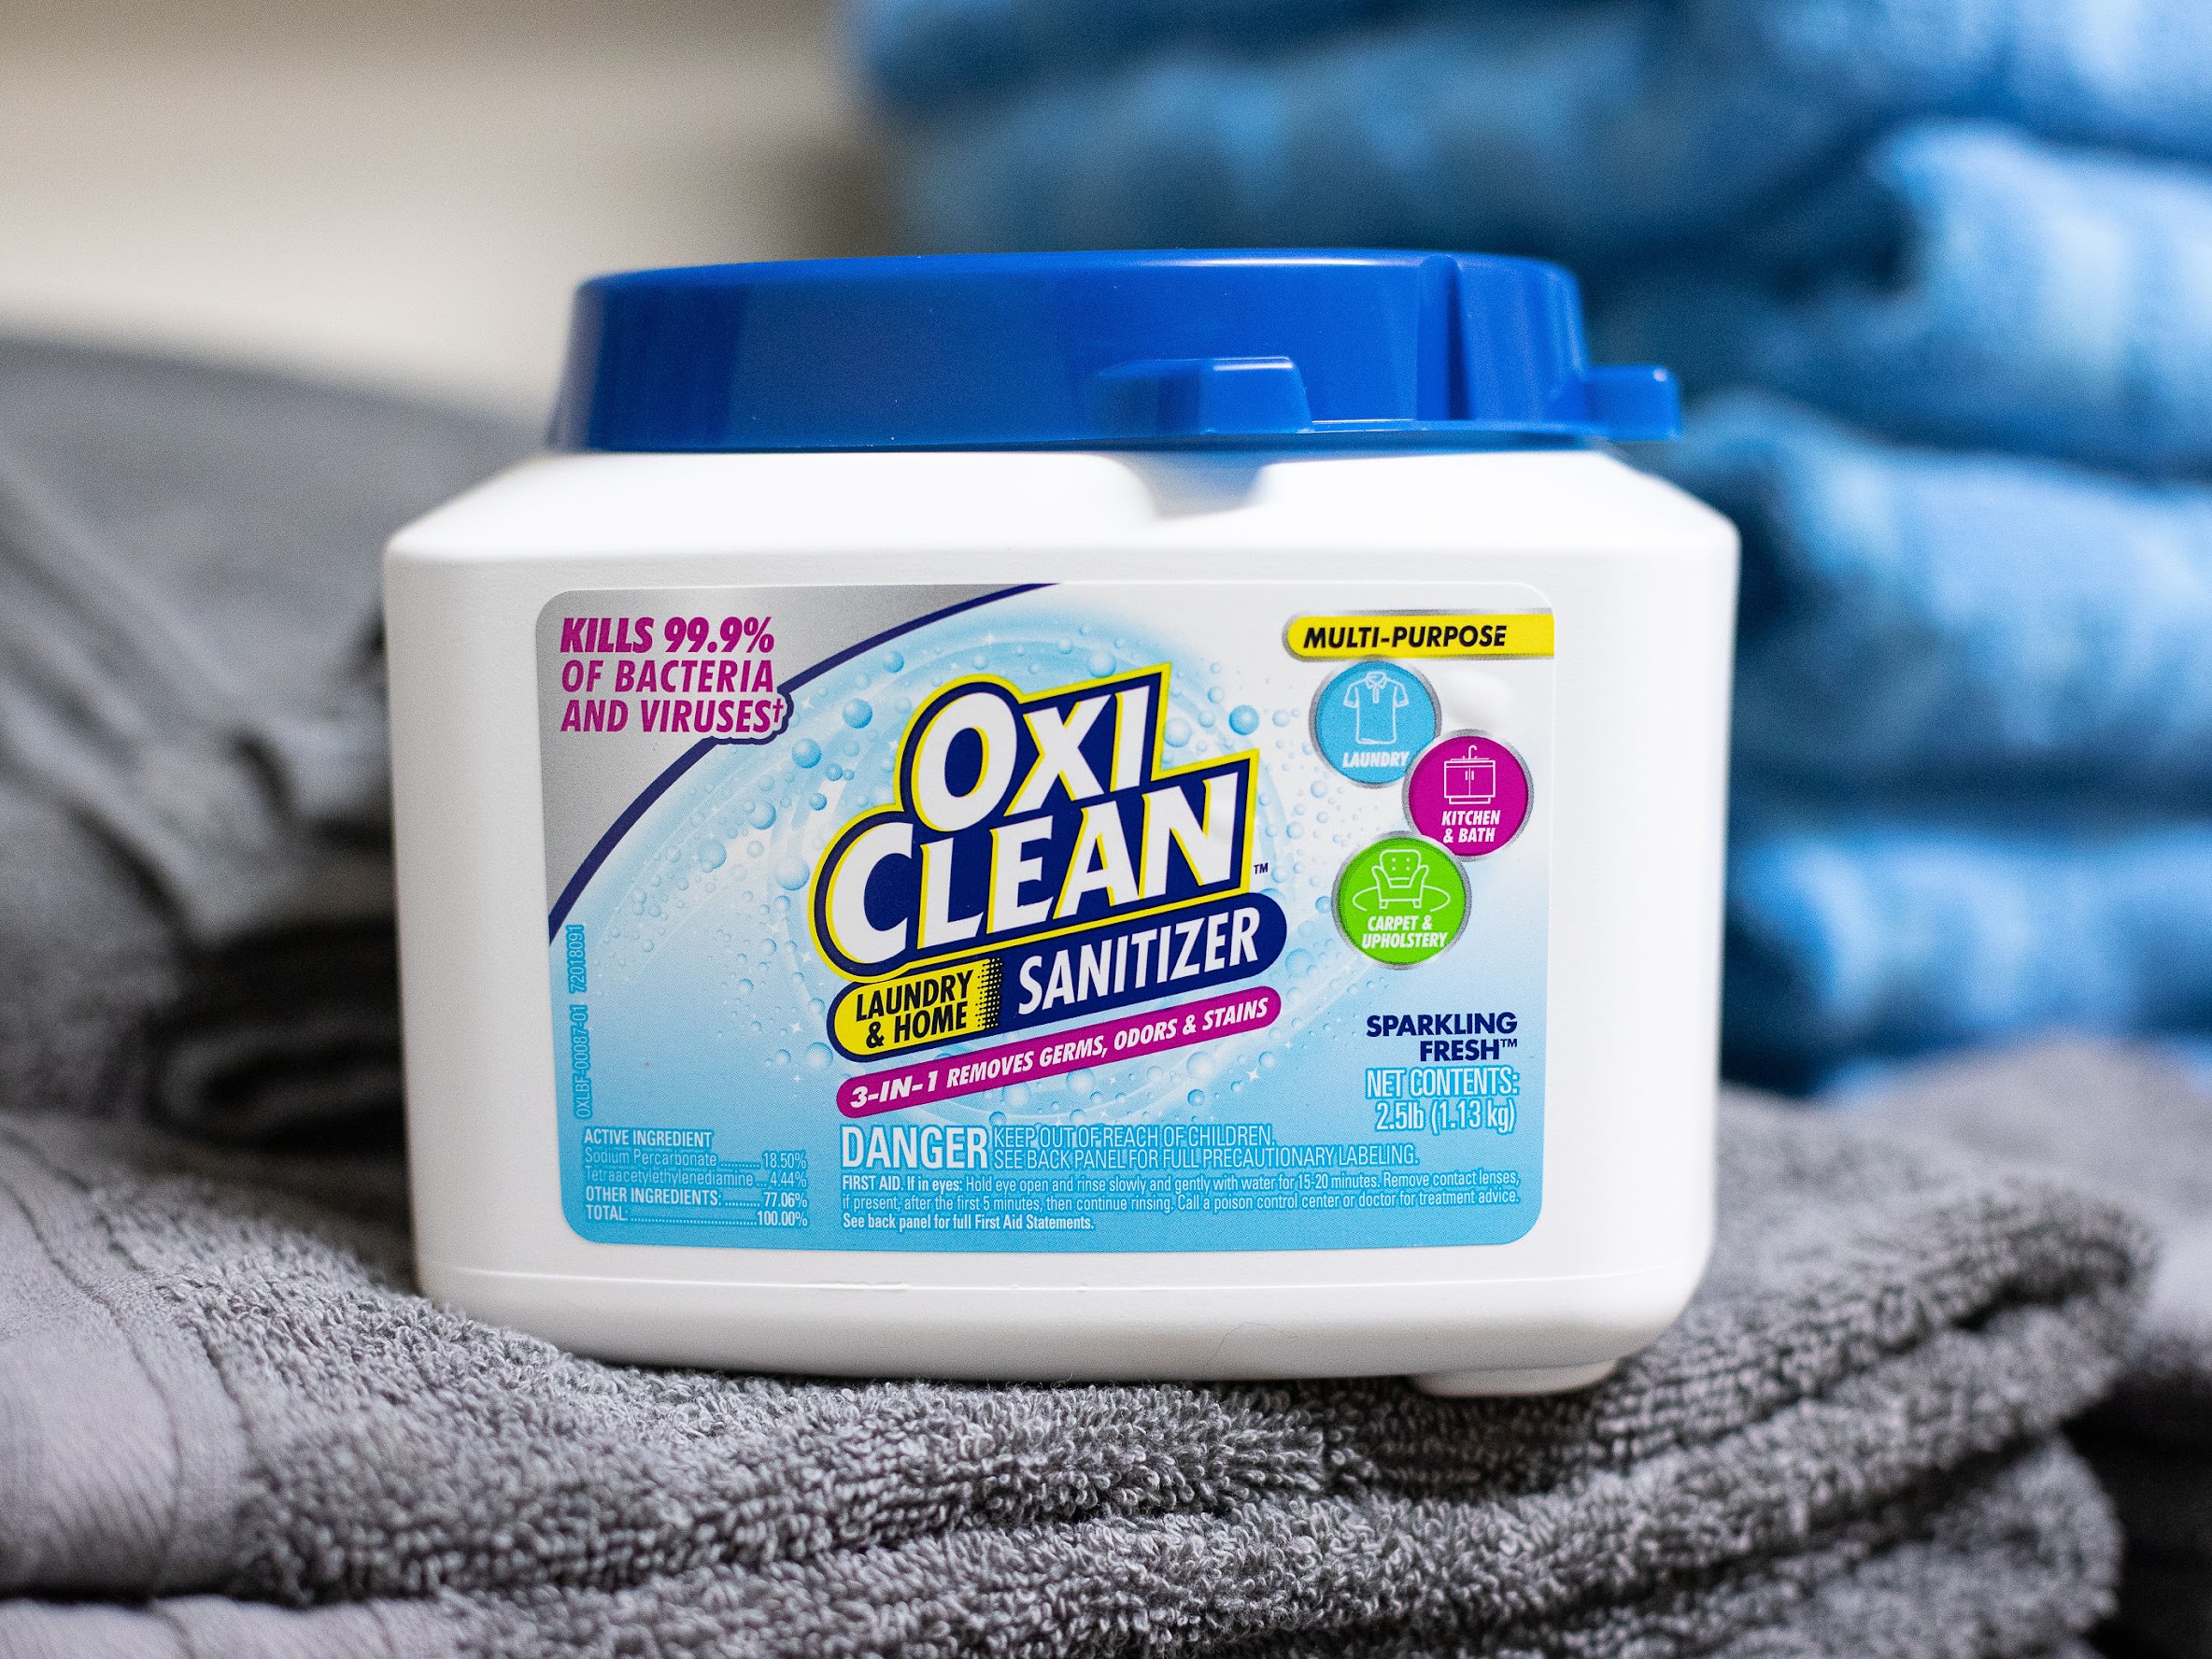 Keep Your Family's Favorite Things CLEAN CLEAN With New OxiClean™ Laundry & Home Sanitizer on I Heart Publix 1